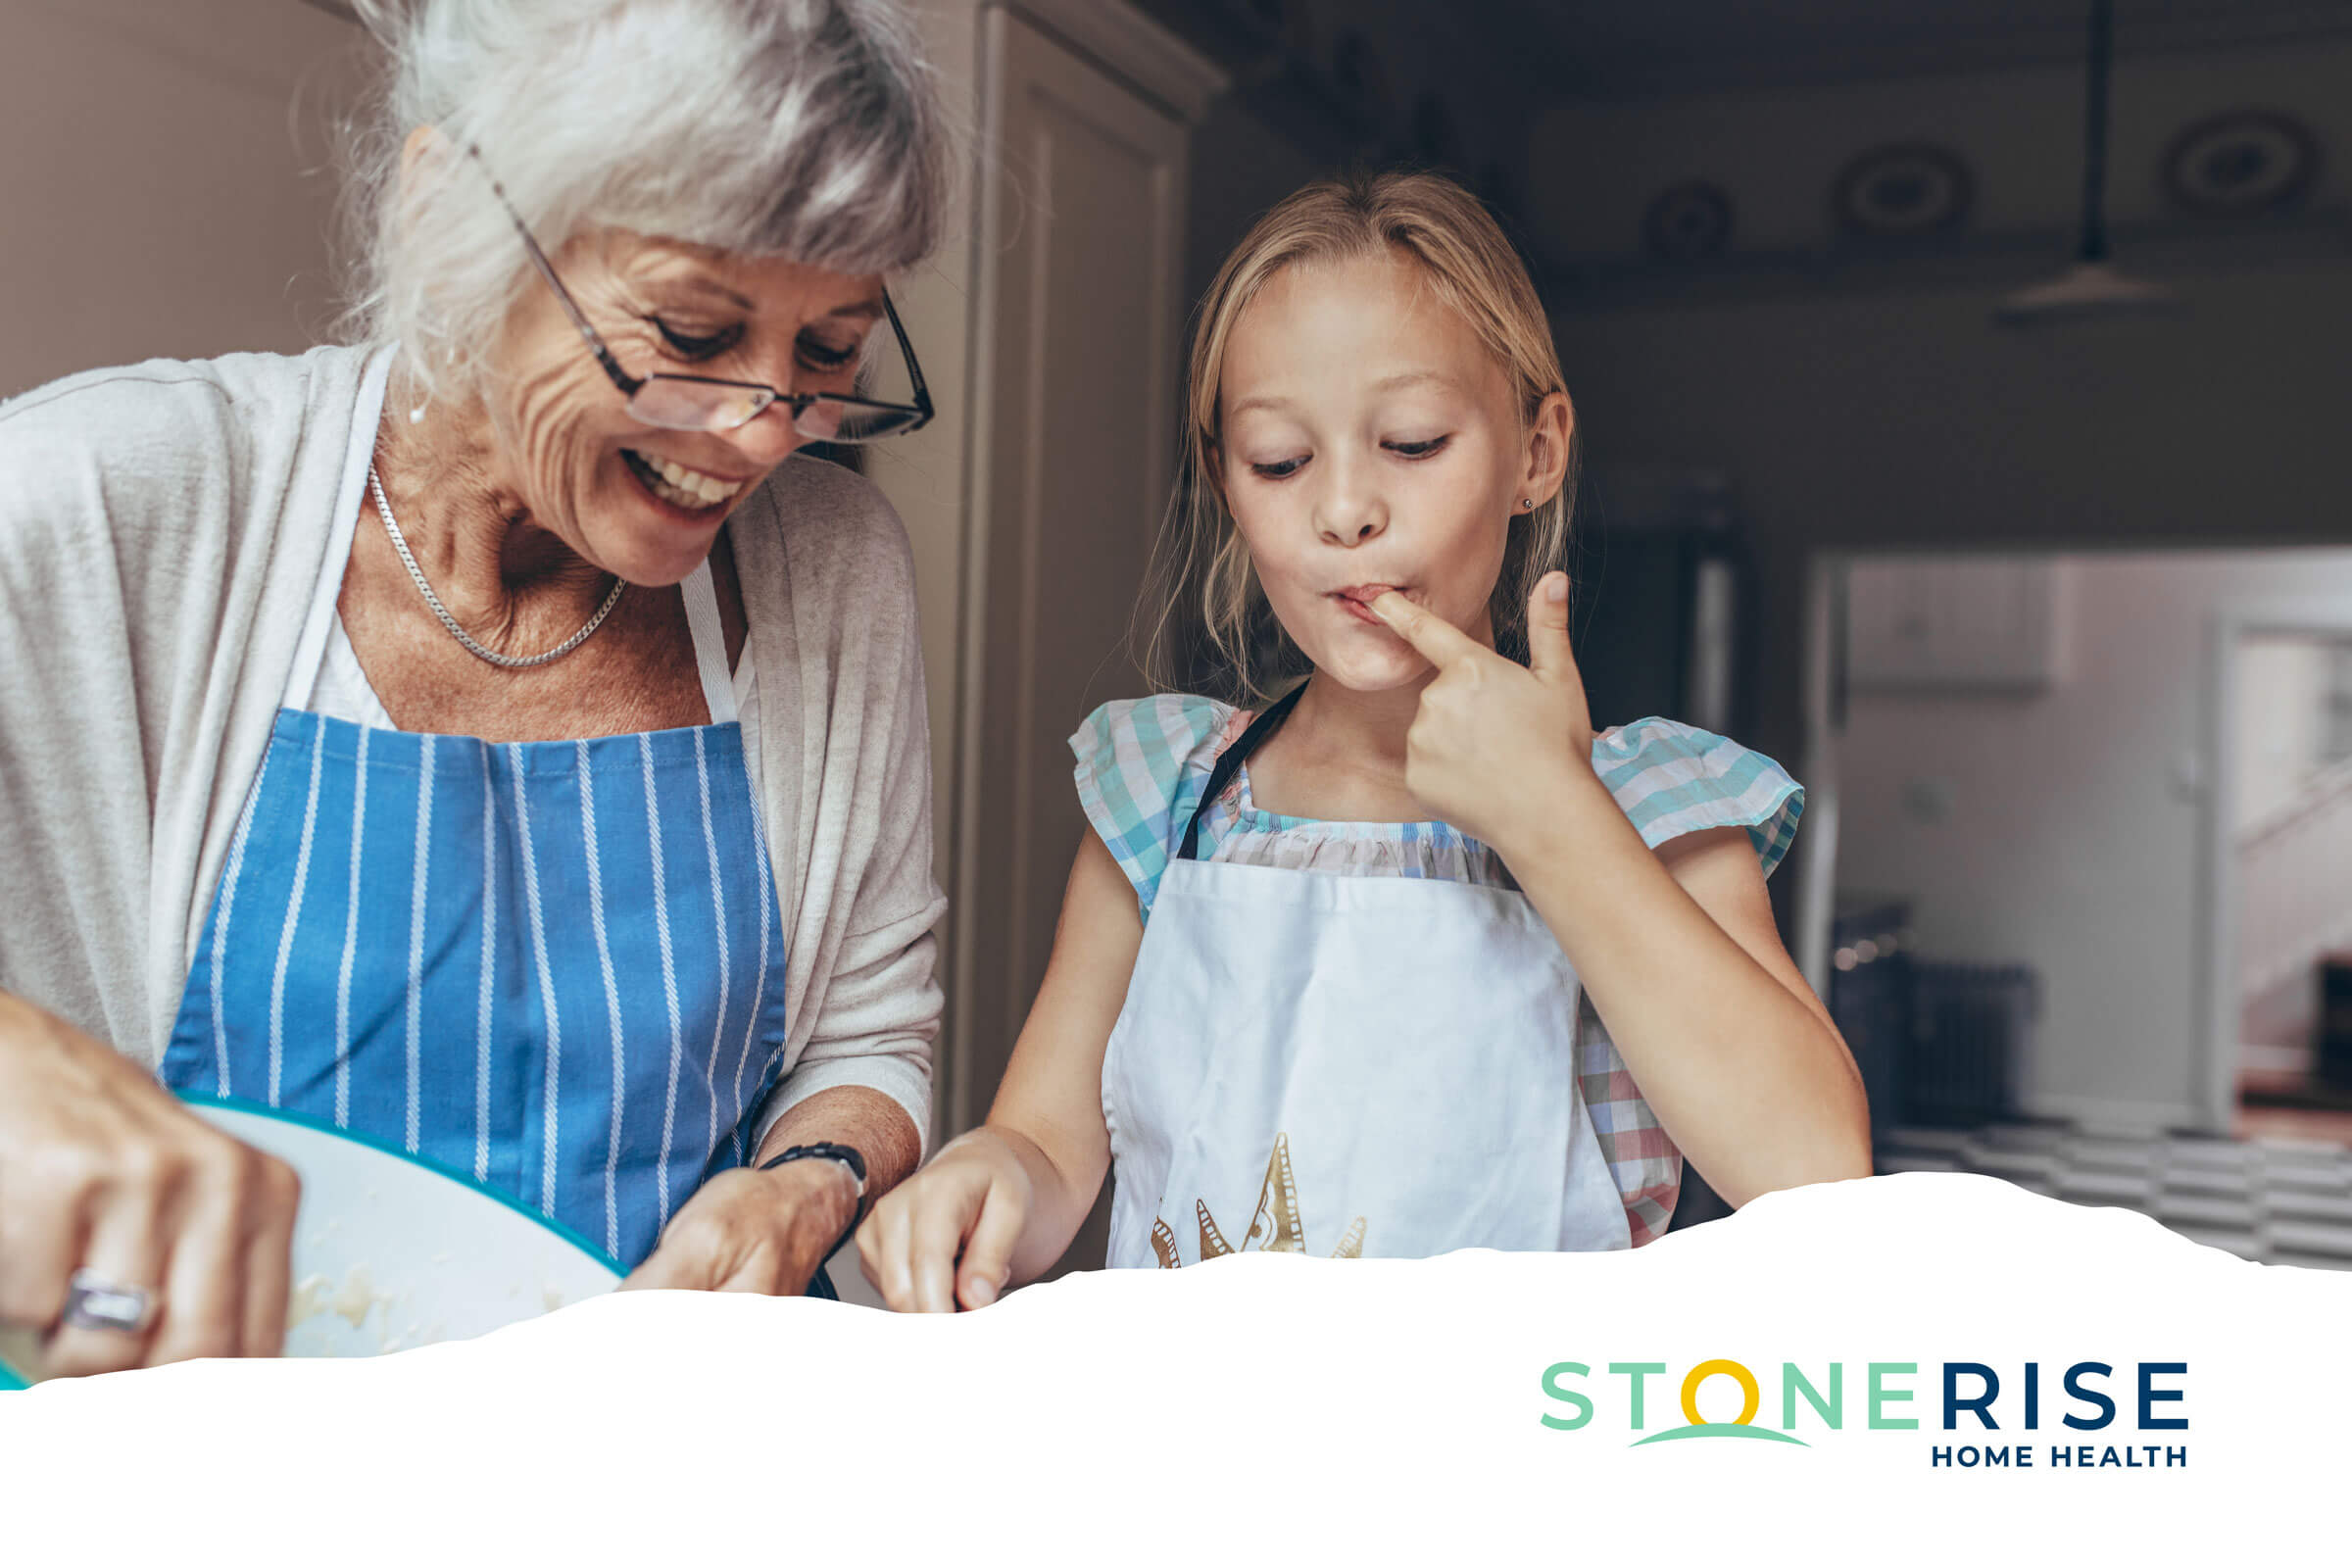 Stonerise branded photo of grandmother and granddaughter making cookies